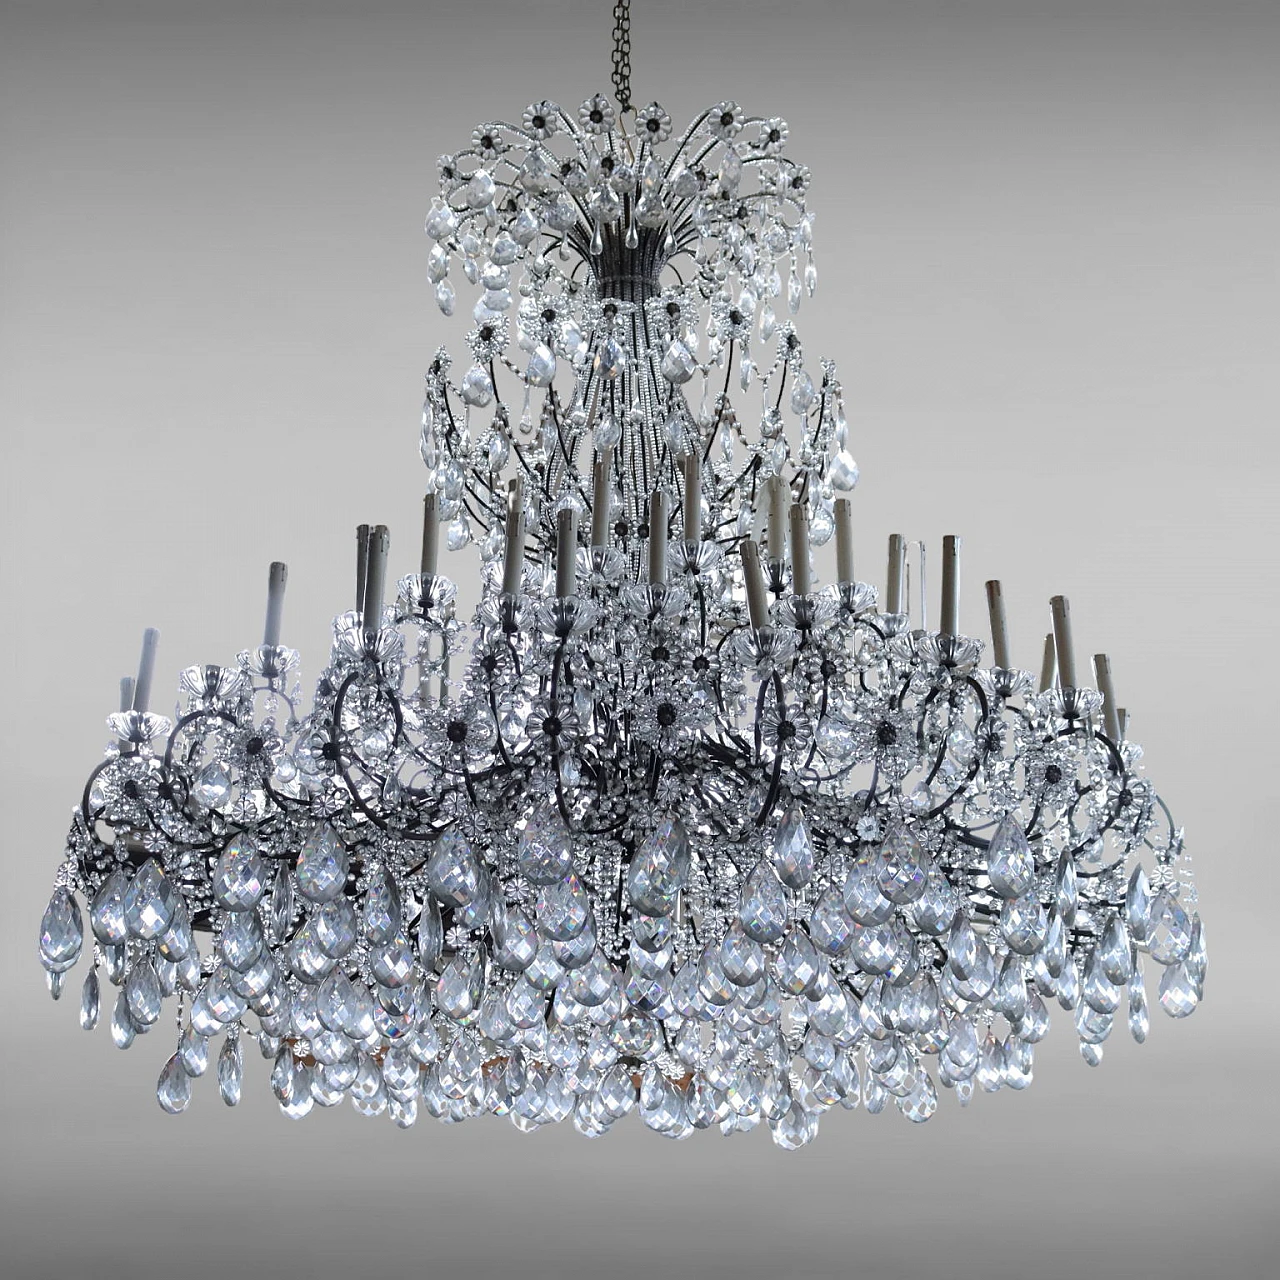 Three-stage chandelier in metal, glass and crystal 1